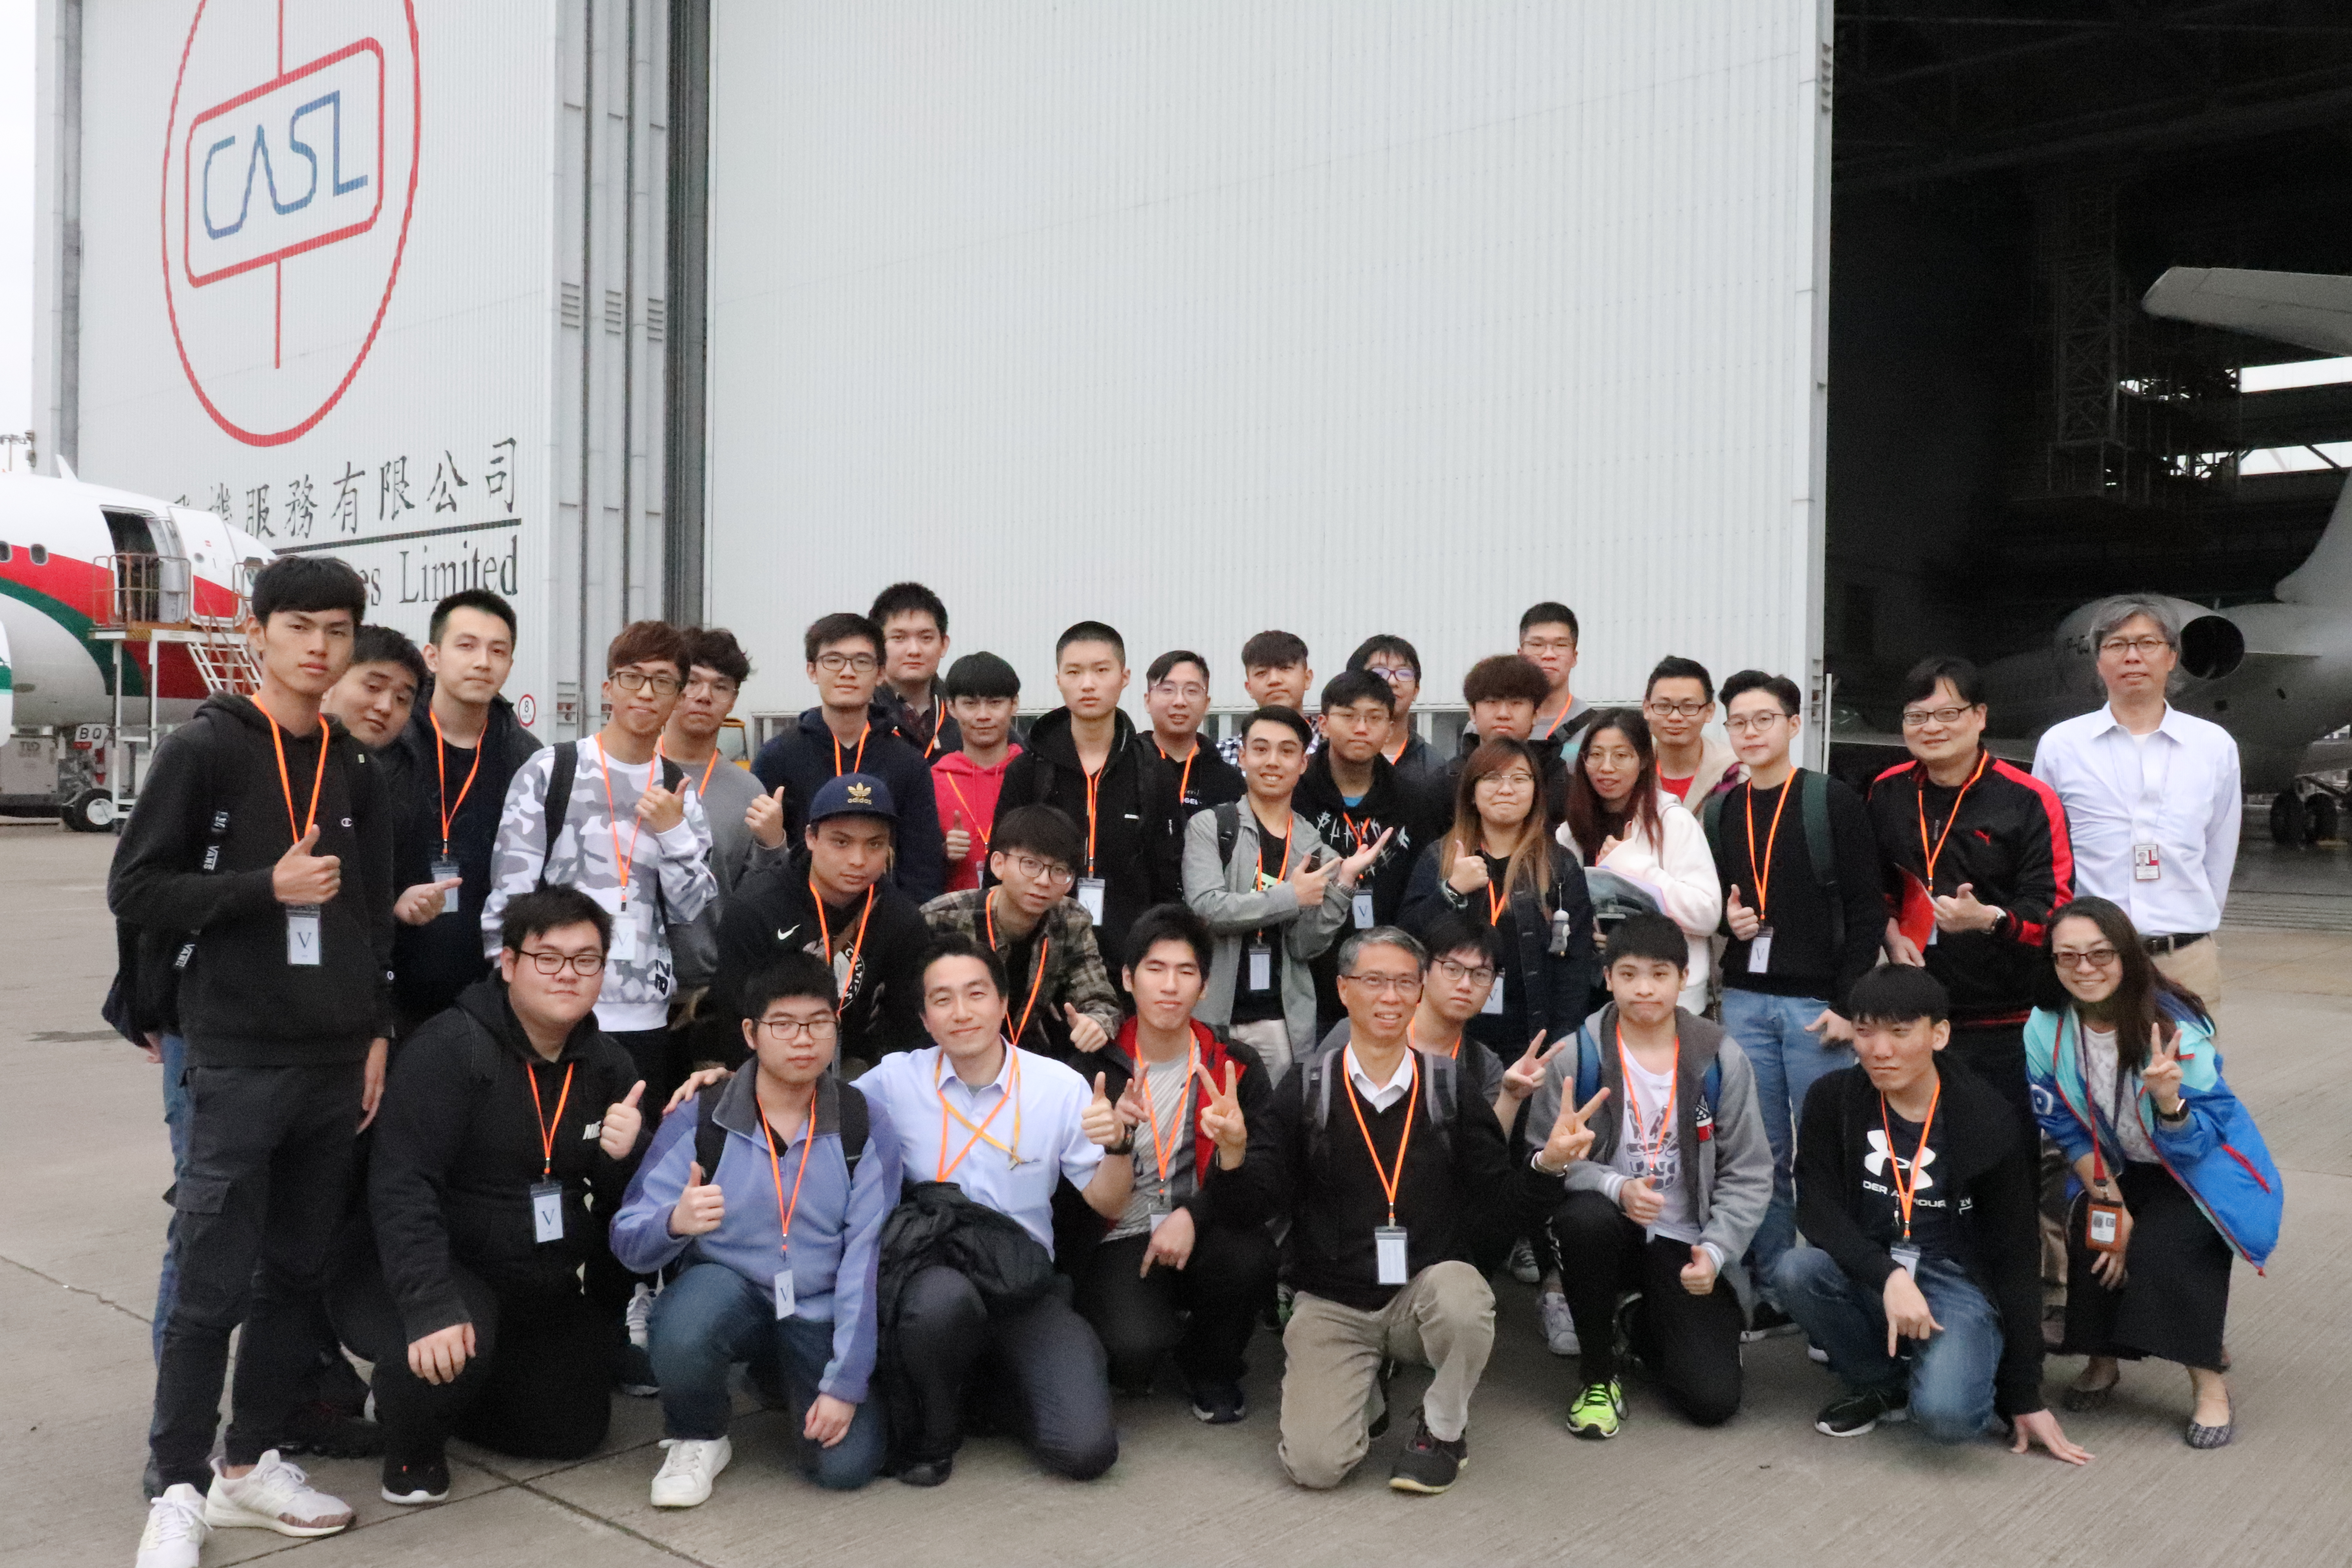 Students from VTC Youth College (Kowloon Bay) toured CASL